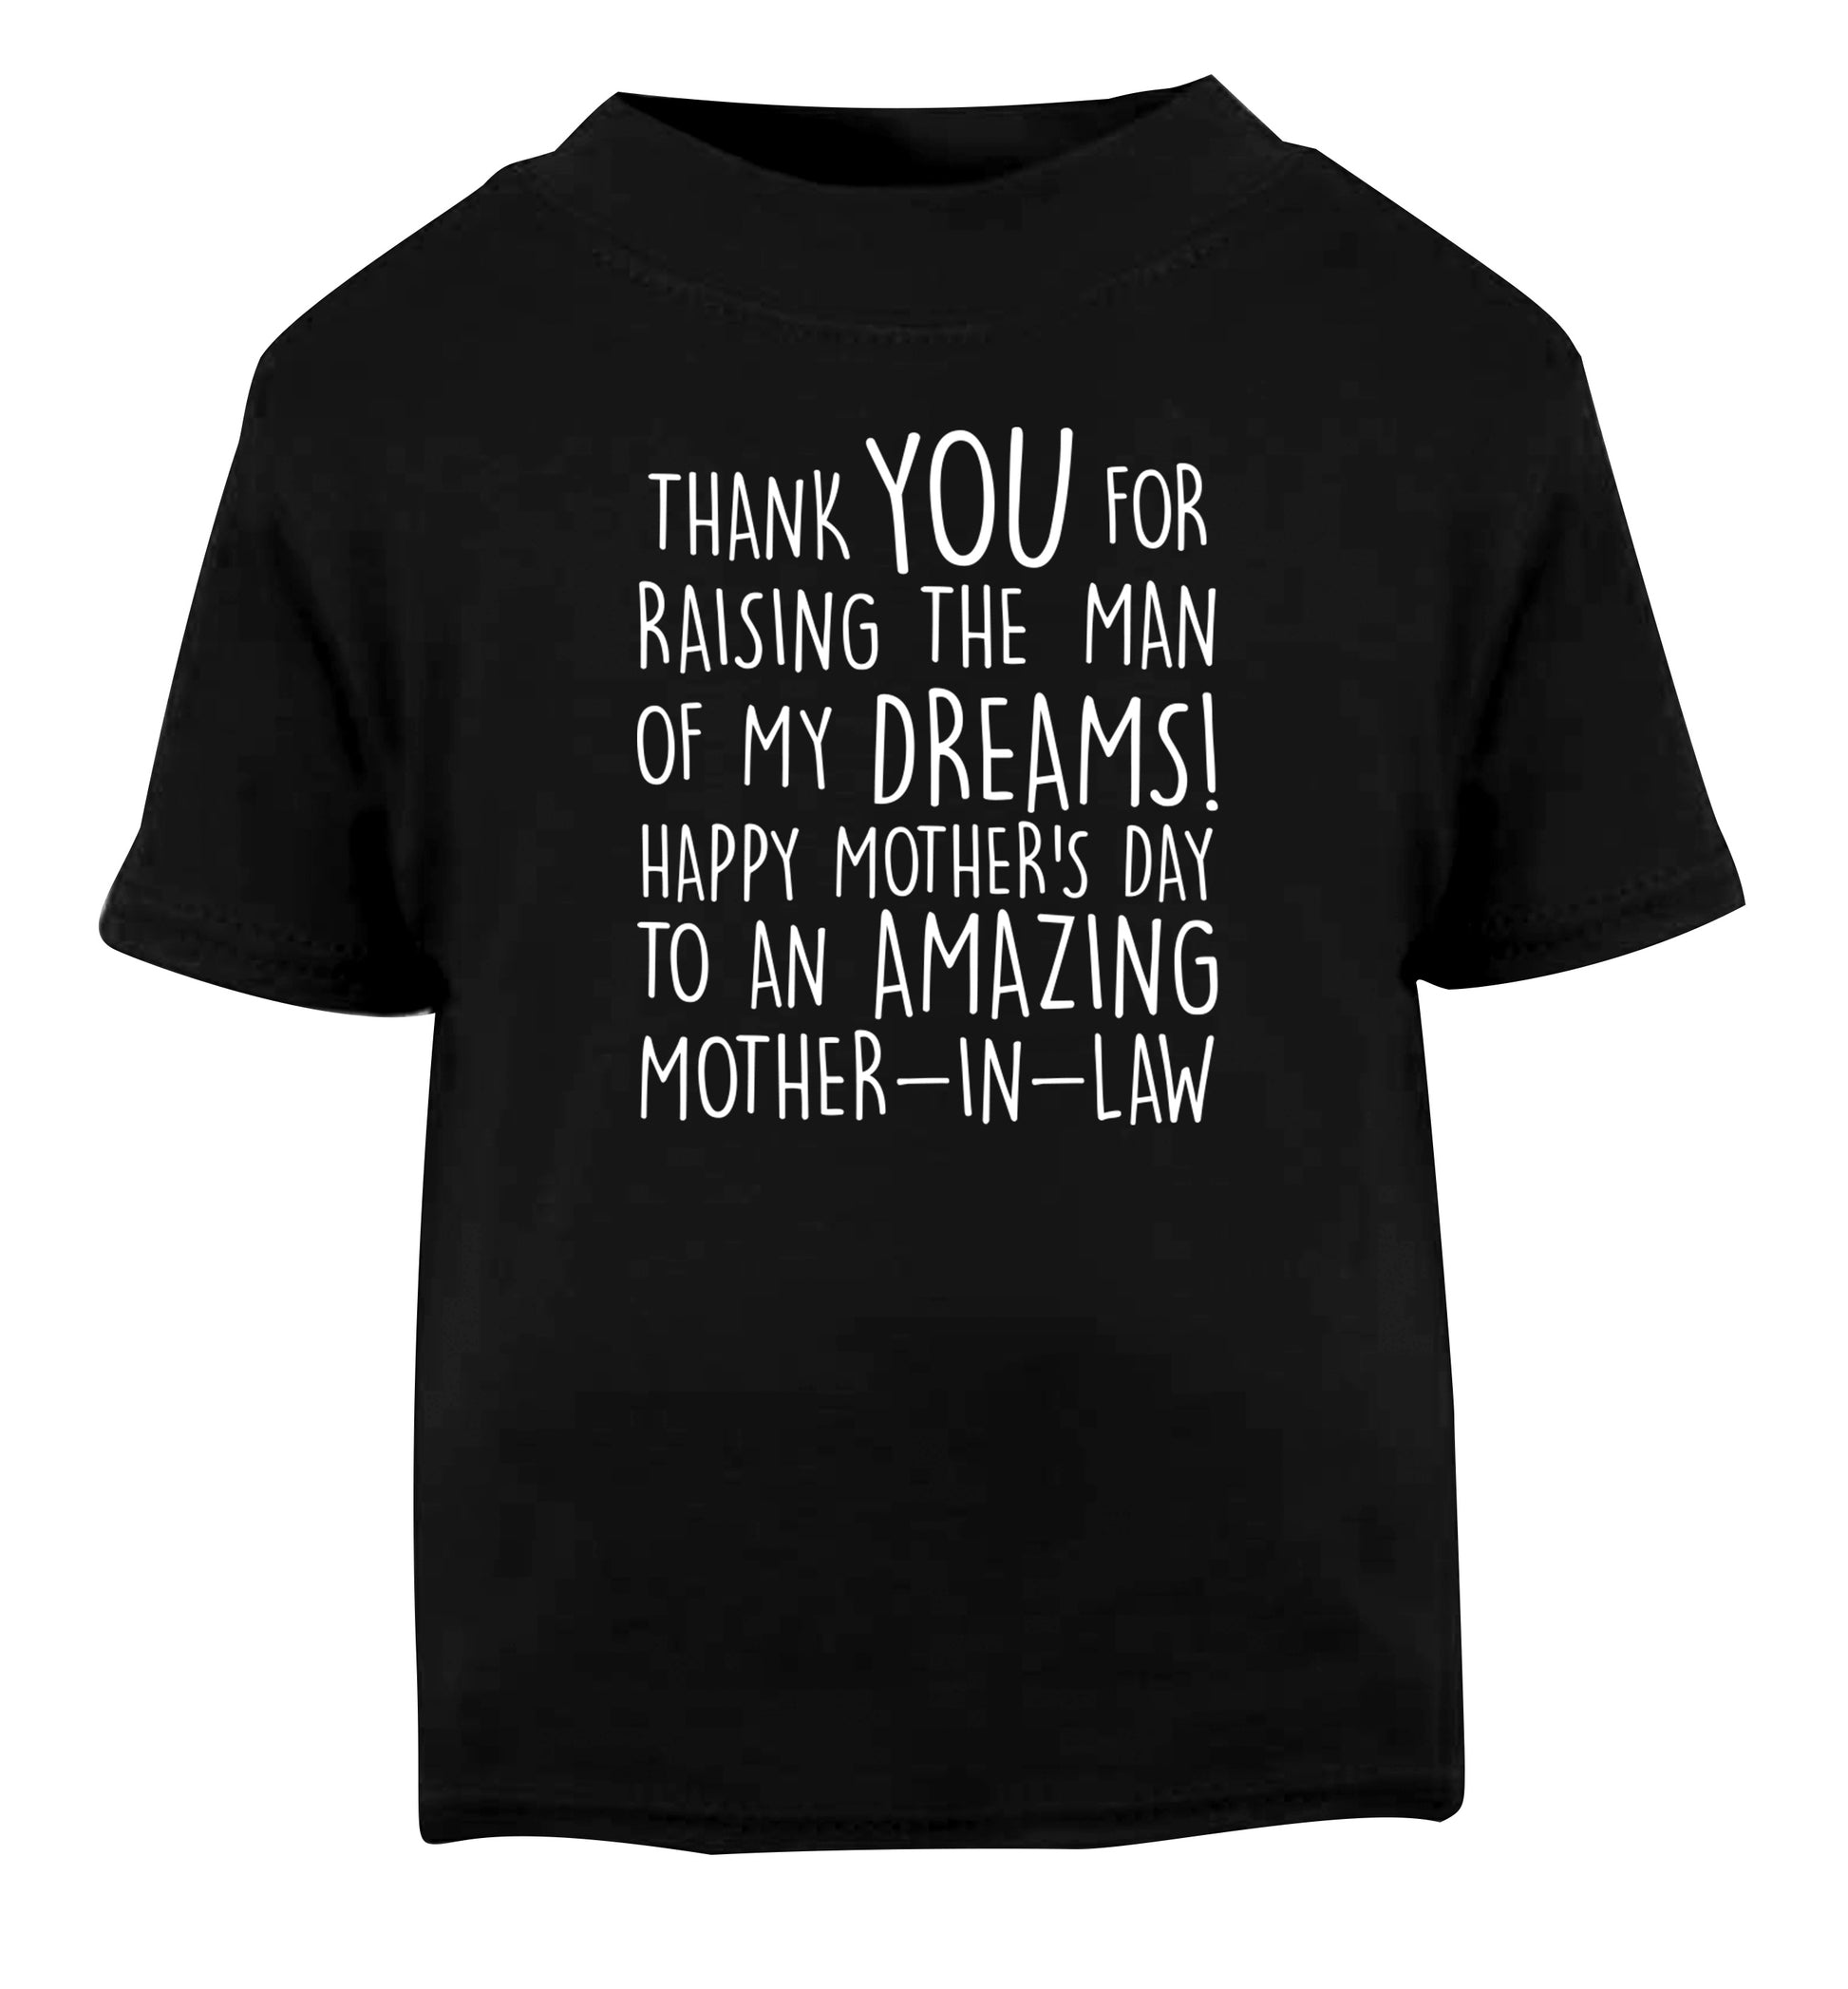 Thank you for raising the man of my dreams happy mother's day mother-in-law Black Baby Toddler Tshirt 2 years